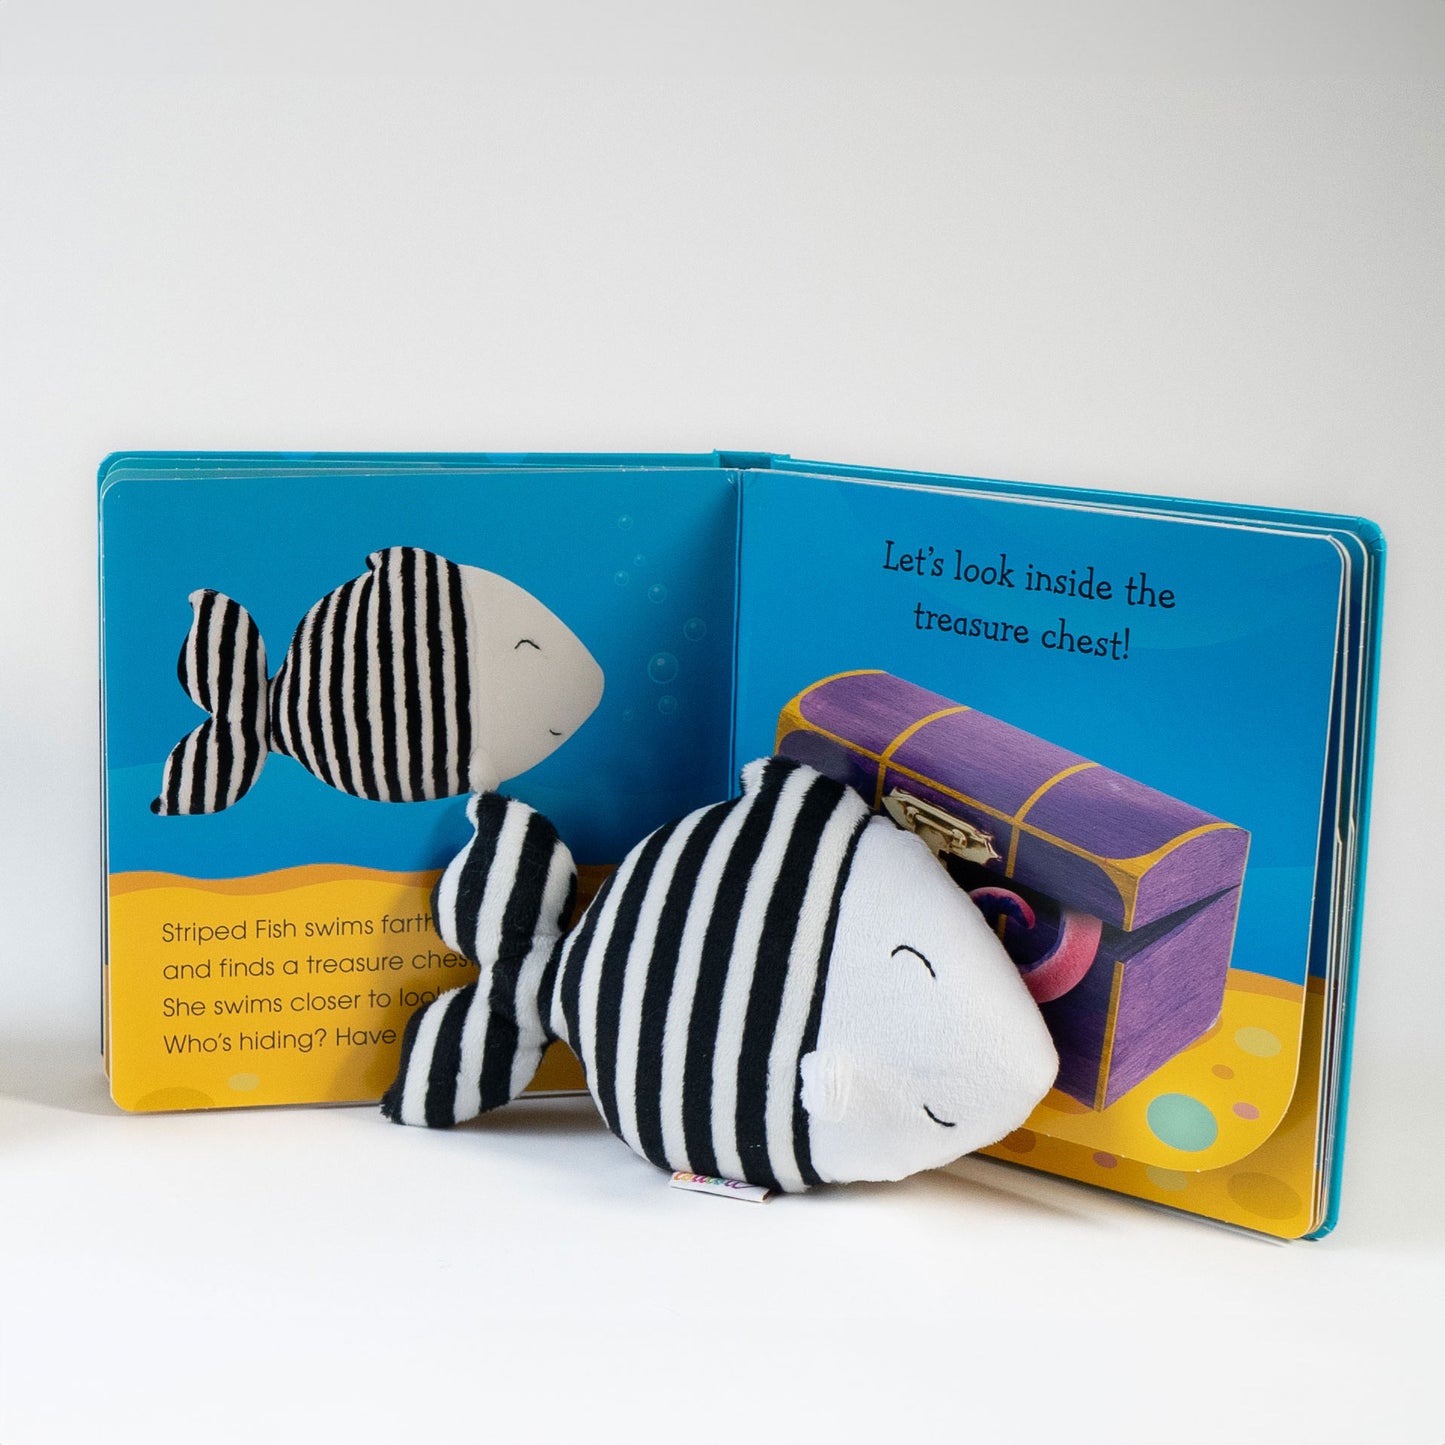 1 plush toy and book - Fish